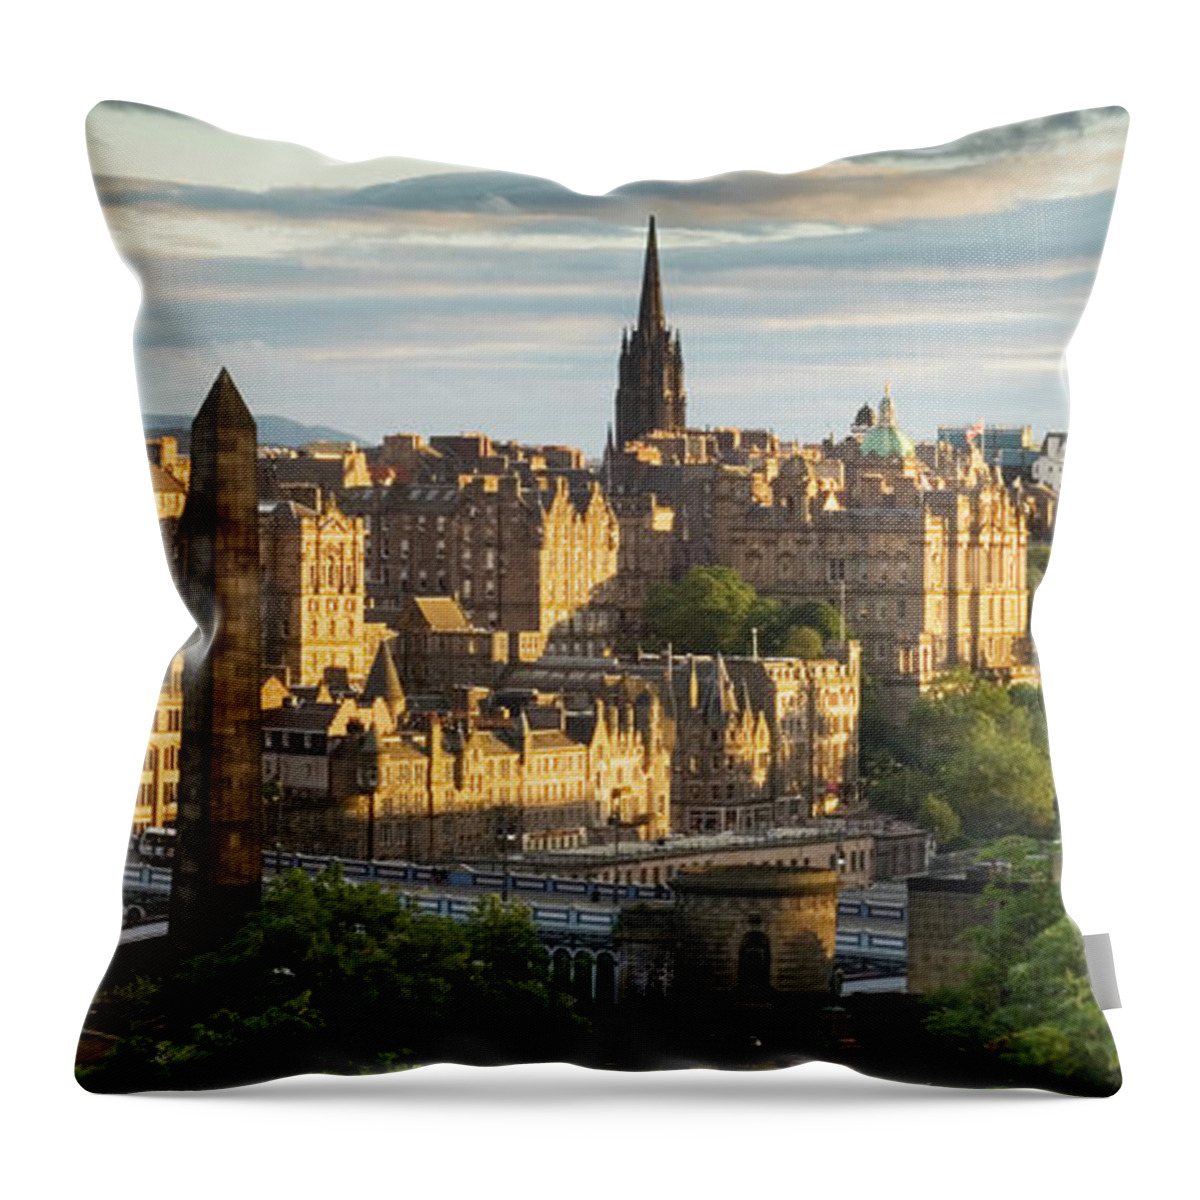 Lothian Throw Pillow featuring the photograph Looking Down At Edinburgh As The Sun by Northlightimages